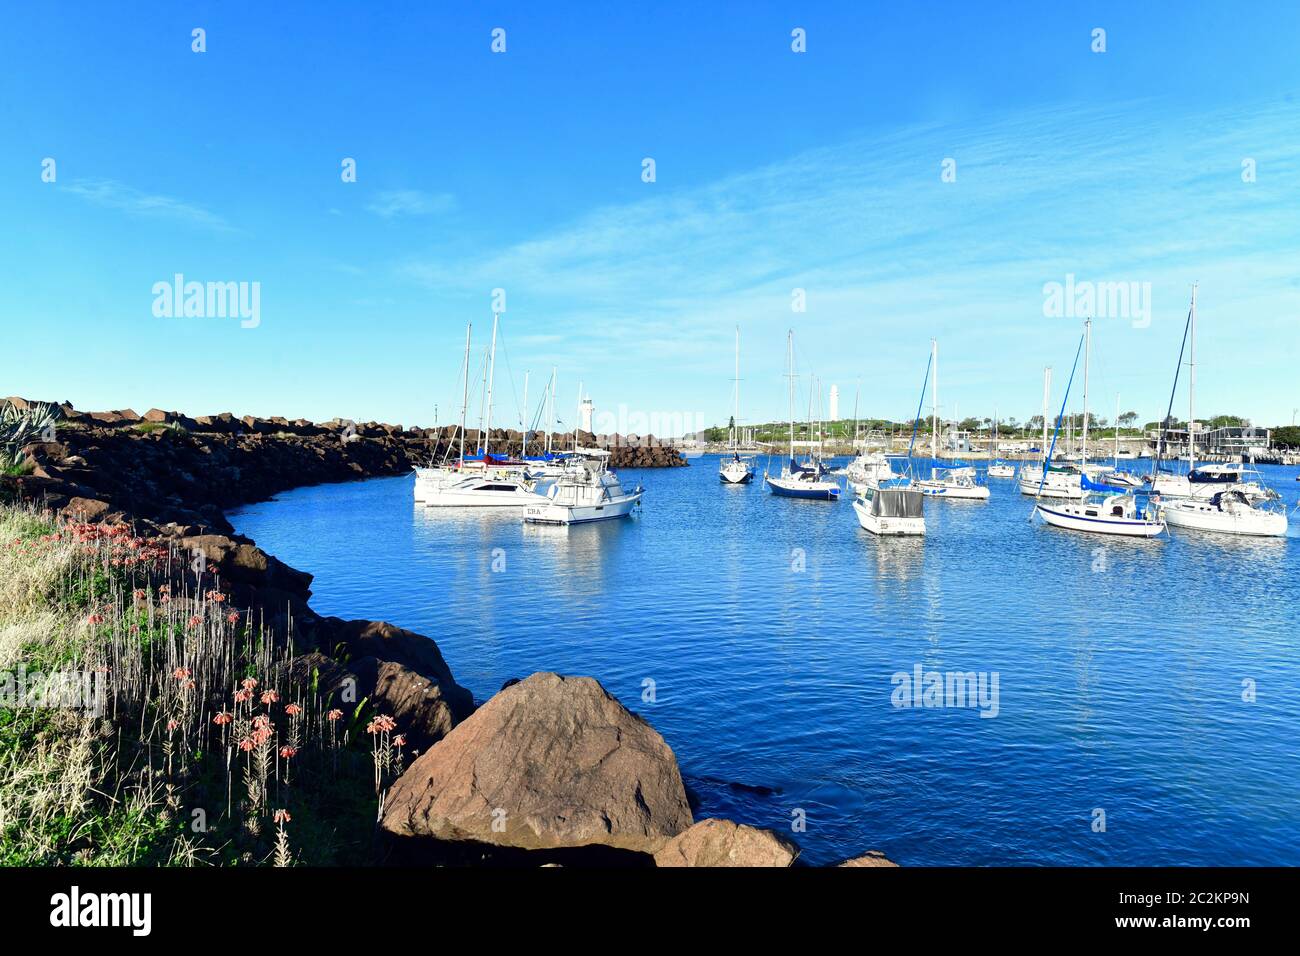 A view of Wollongong harbor in Australia Stock Photo